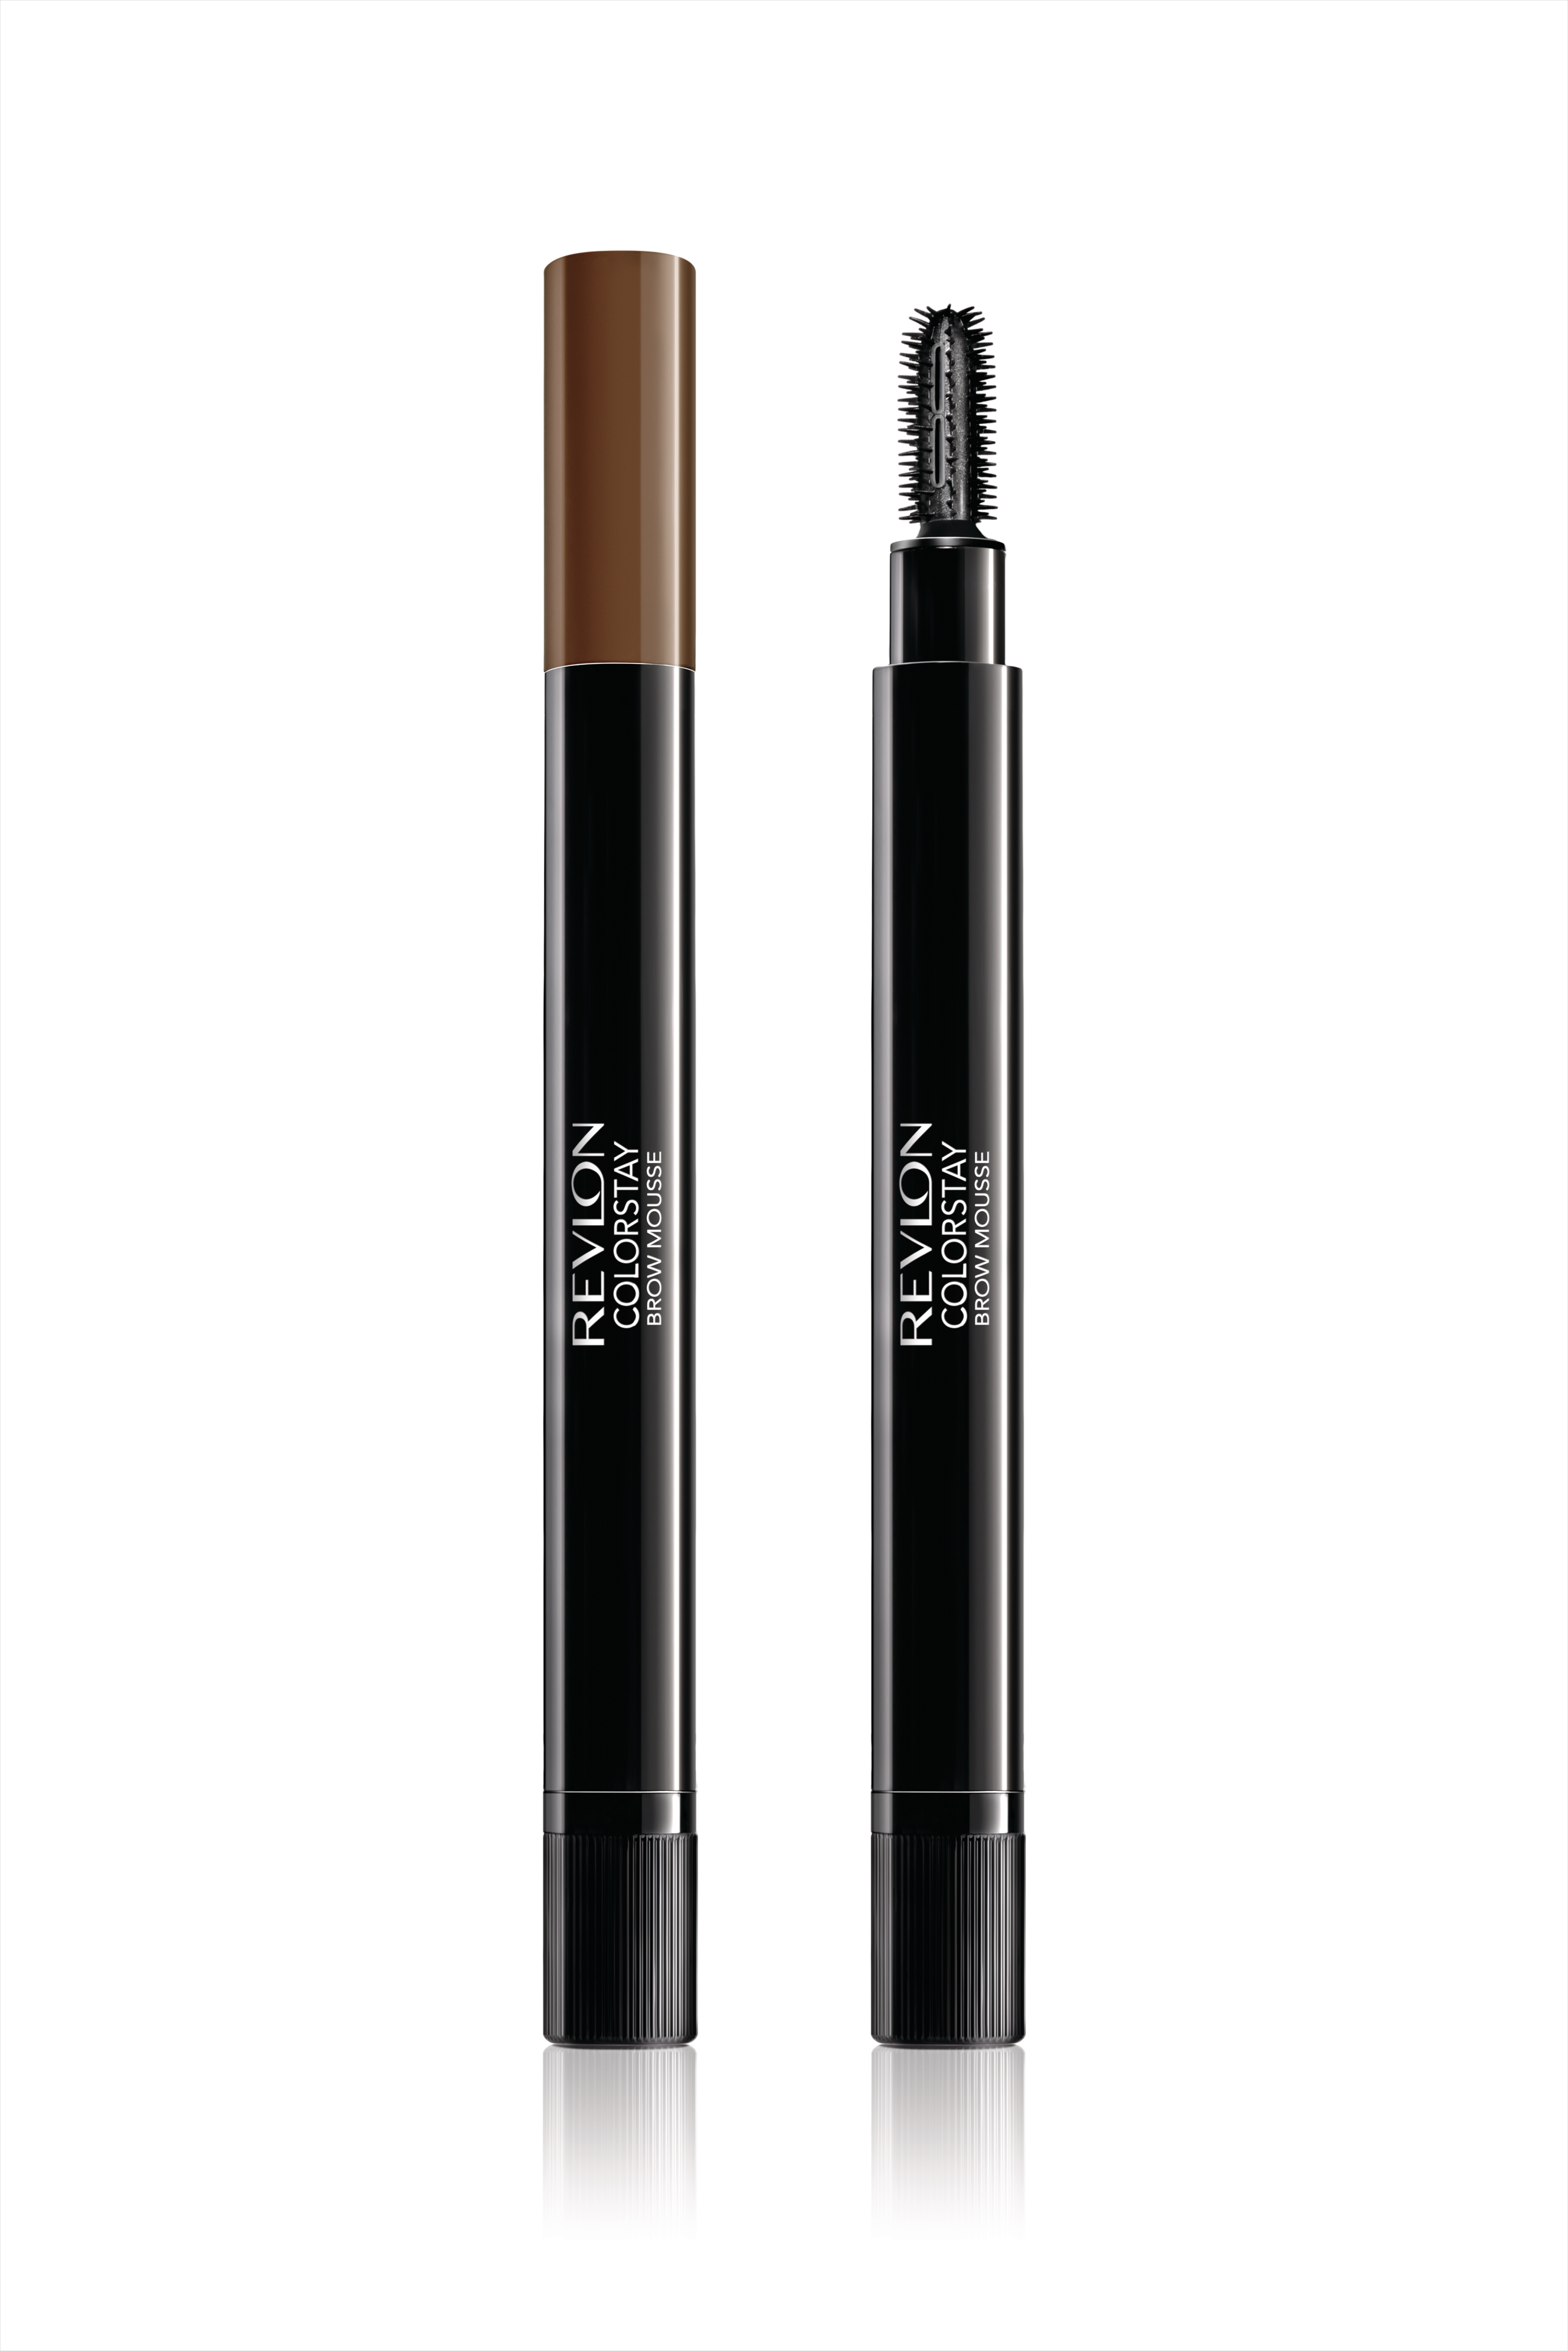 Revlon Colorstay Brow Mousse Soft Brown - image 2 of 4